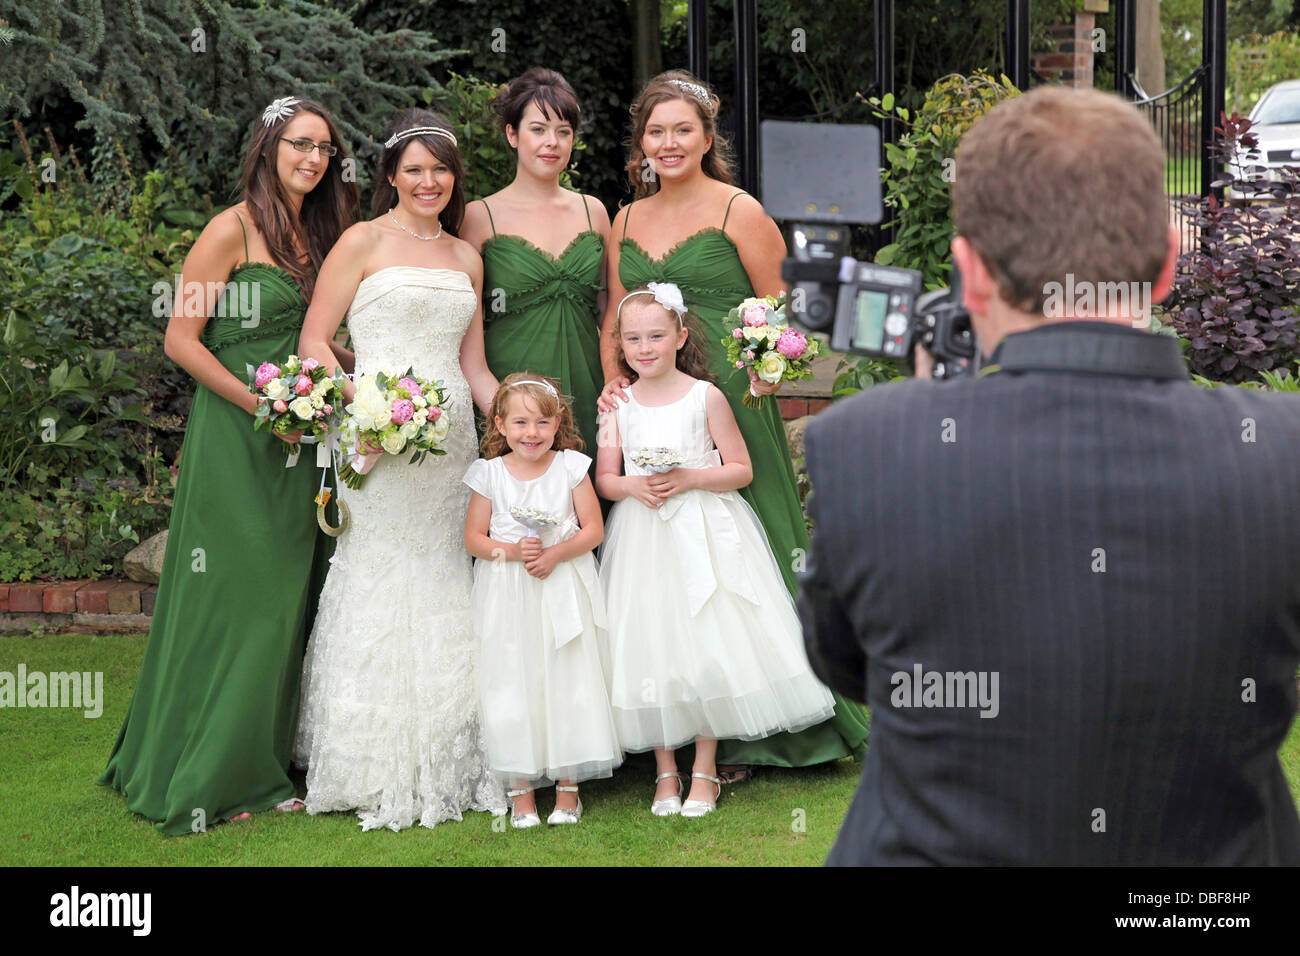 A Wedding photographer can be seen photographing a bride and her bridesmaids. Stock Photo